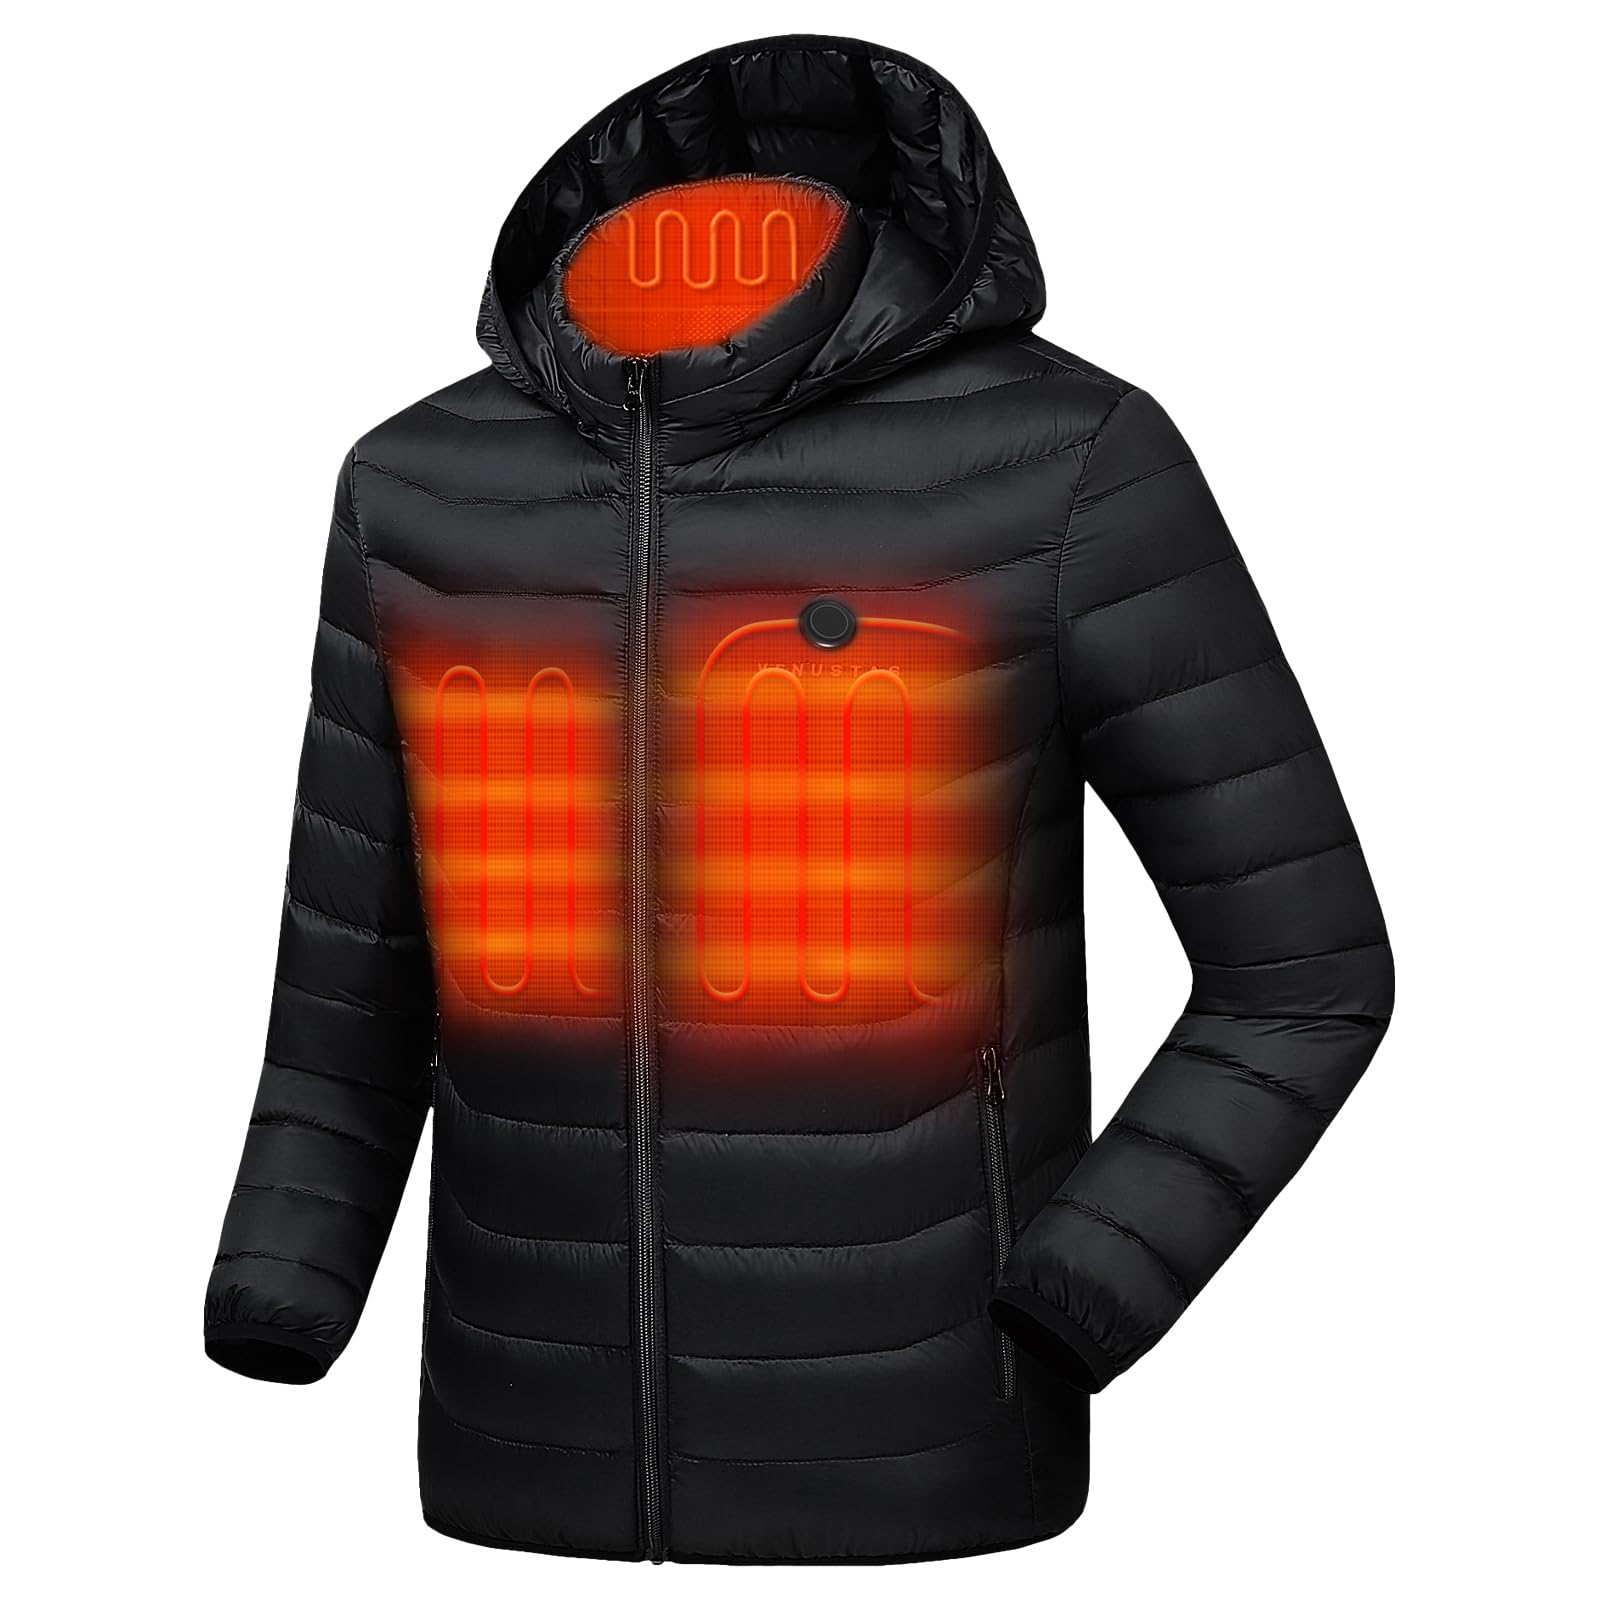 Venustas Heated Jacket with Battery Pack (Unisex), Heated Coat for Women and Men with Detachable Hood